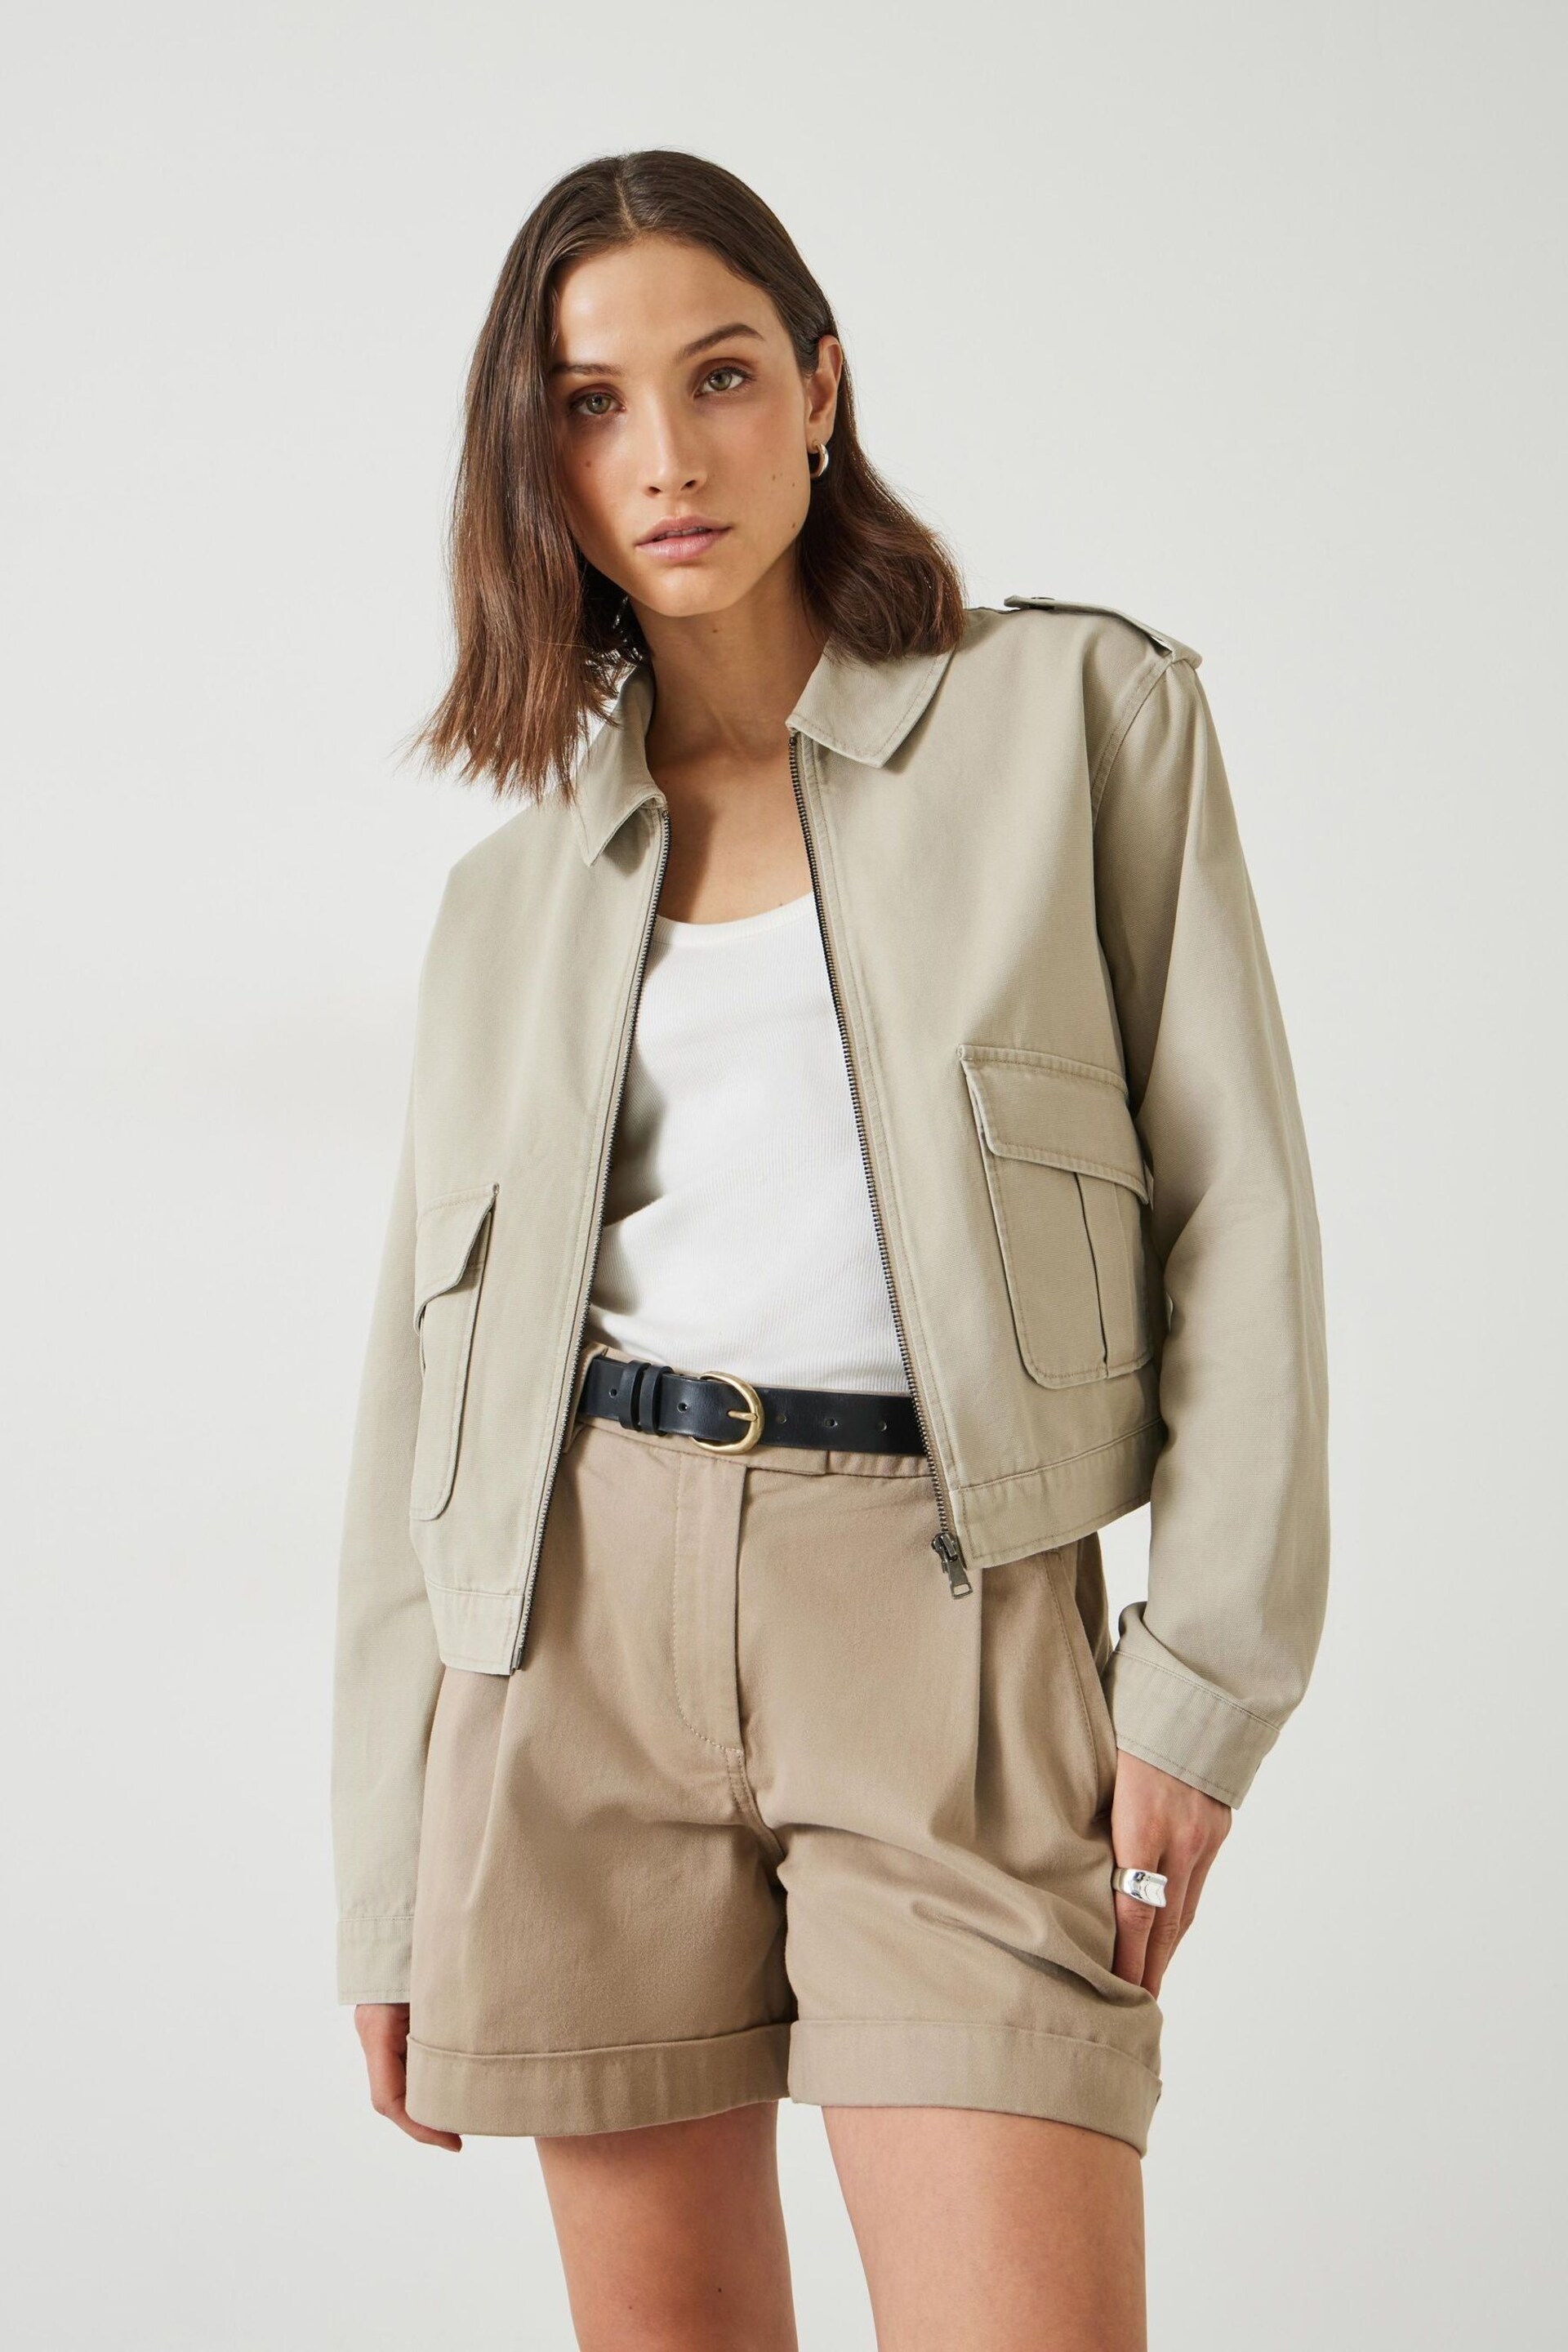 Hush Nude Laurie Zip Up Utility Jacket - Image 1 of 2